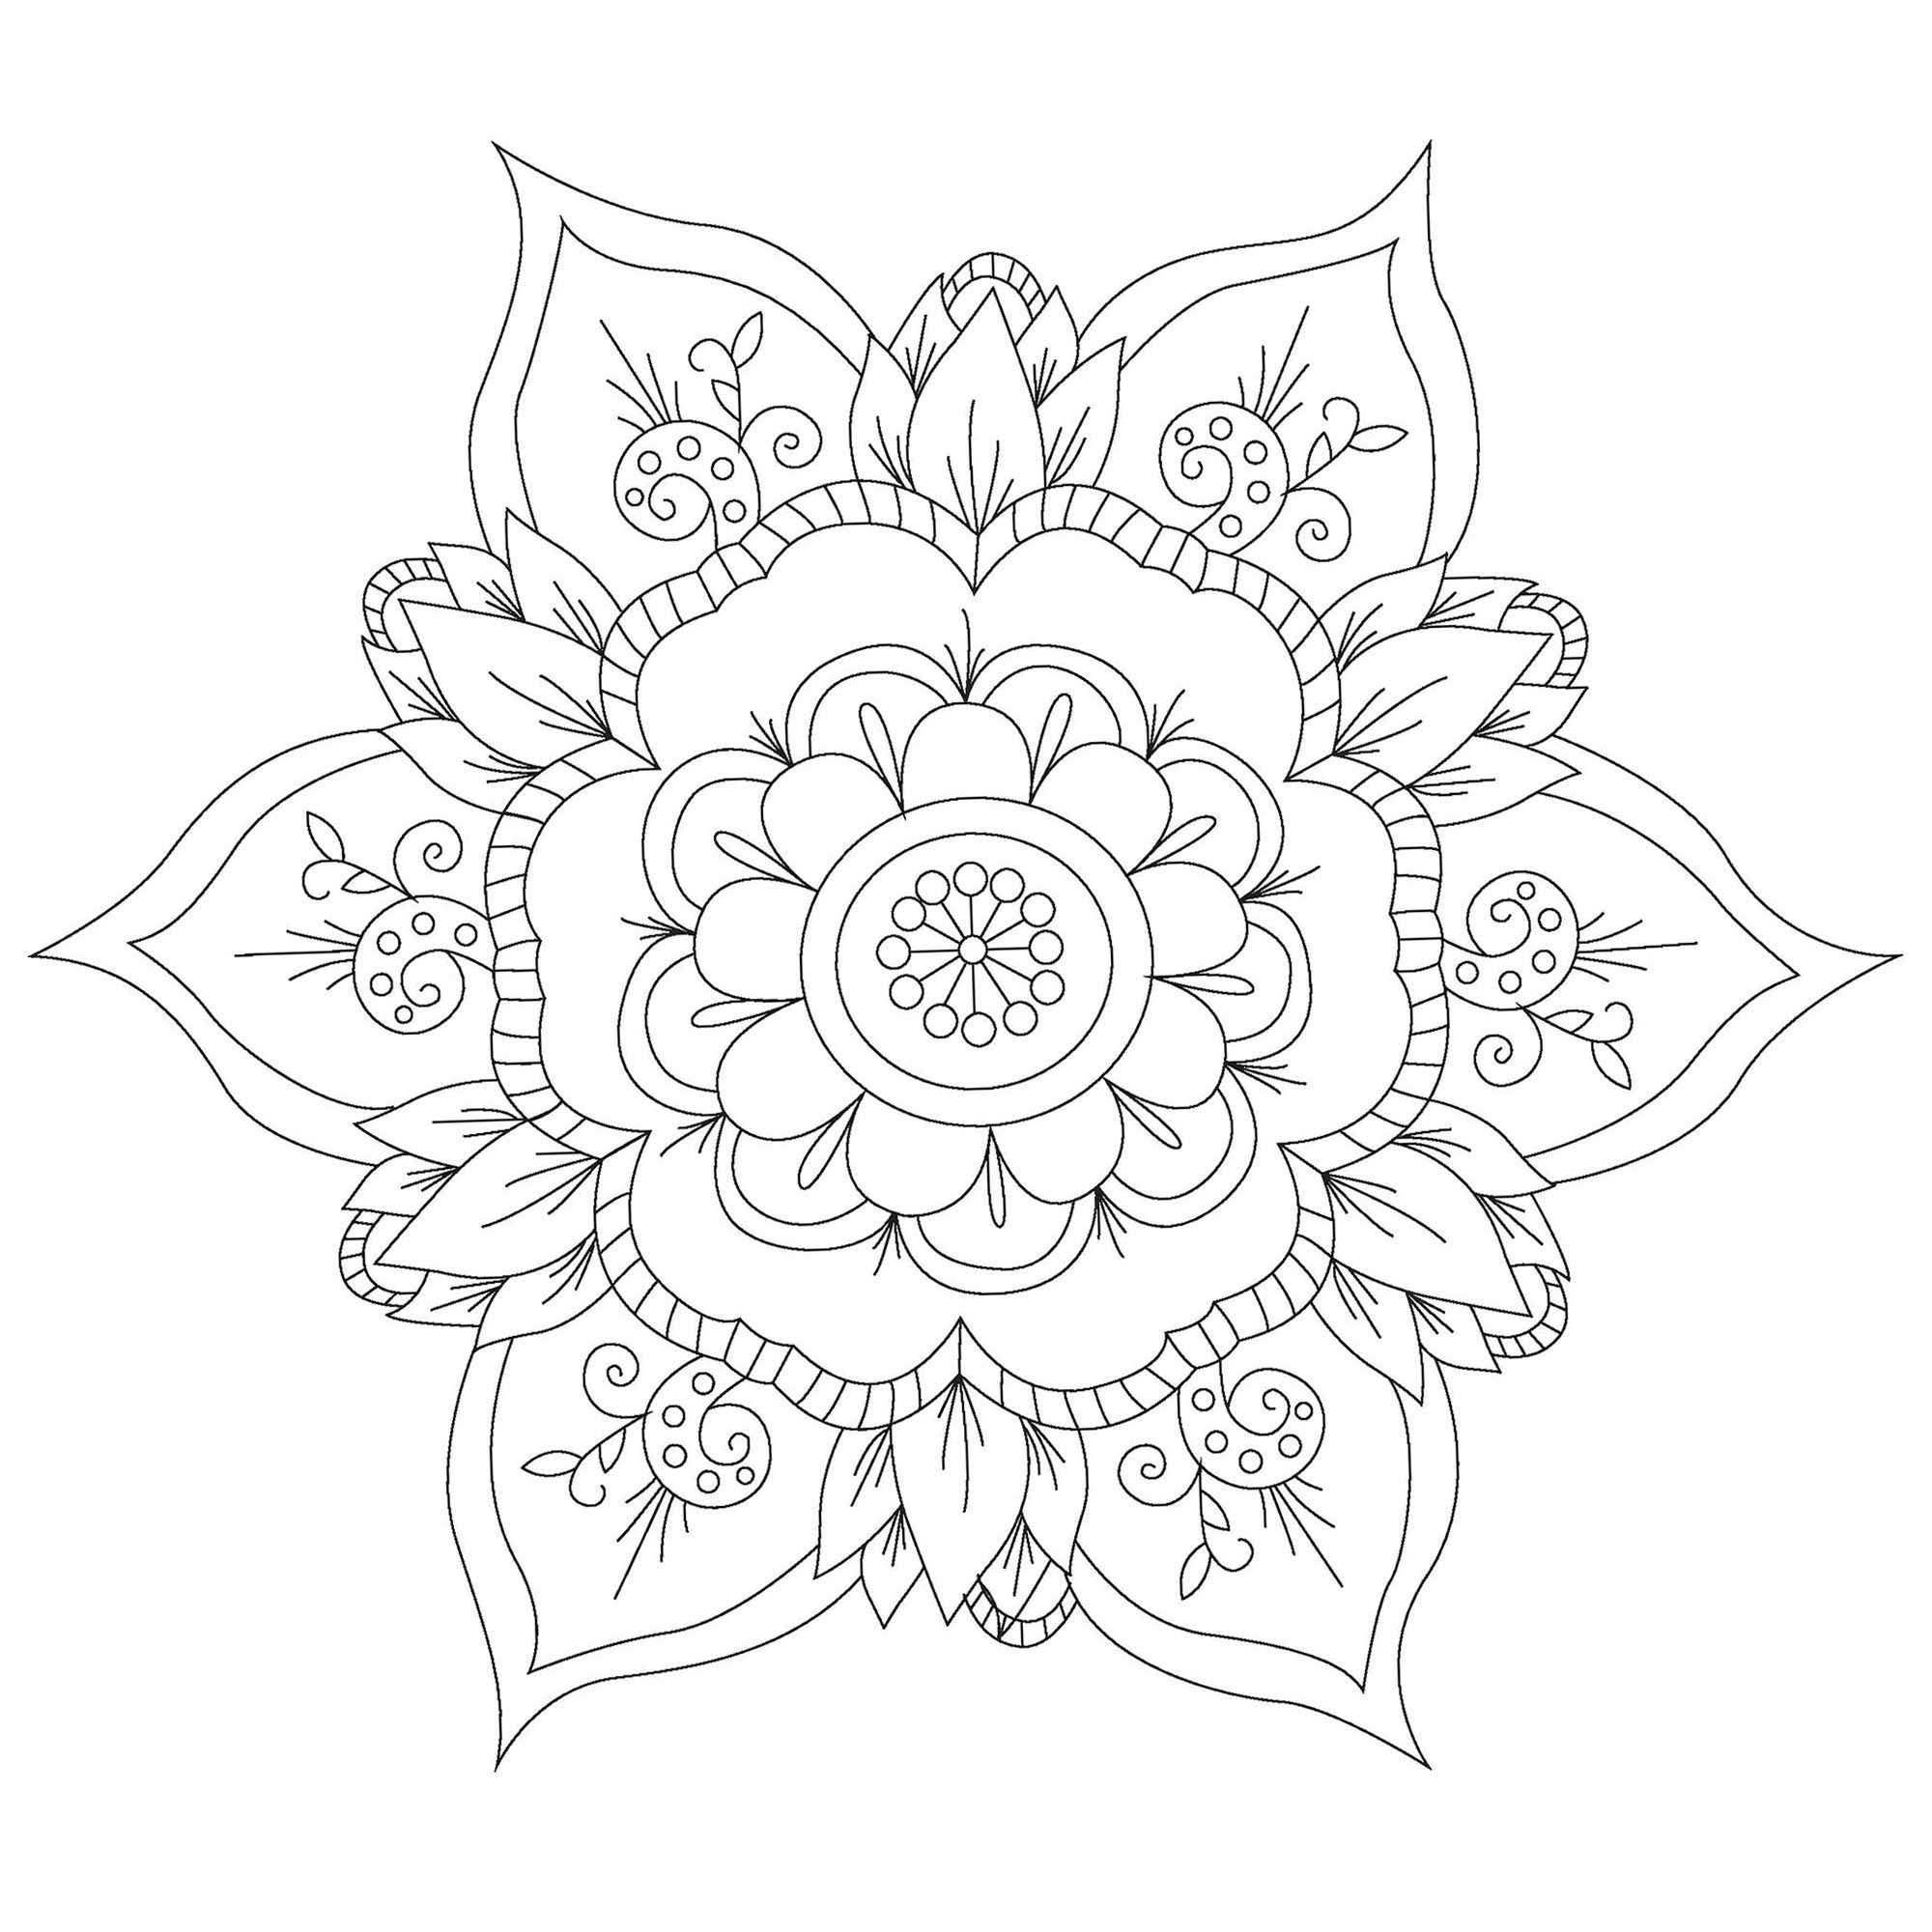 Pretty Mandala in the shape of flowers to color